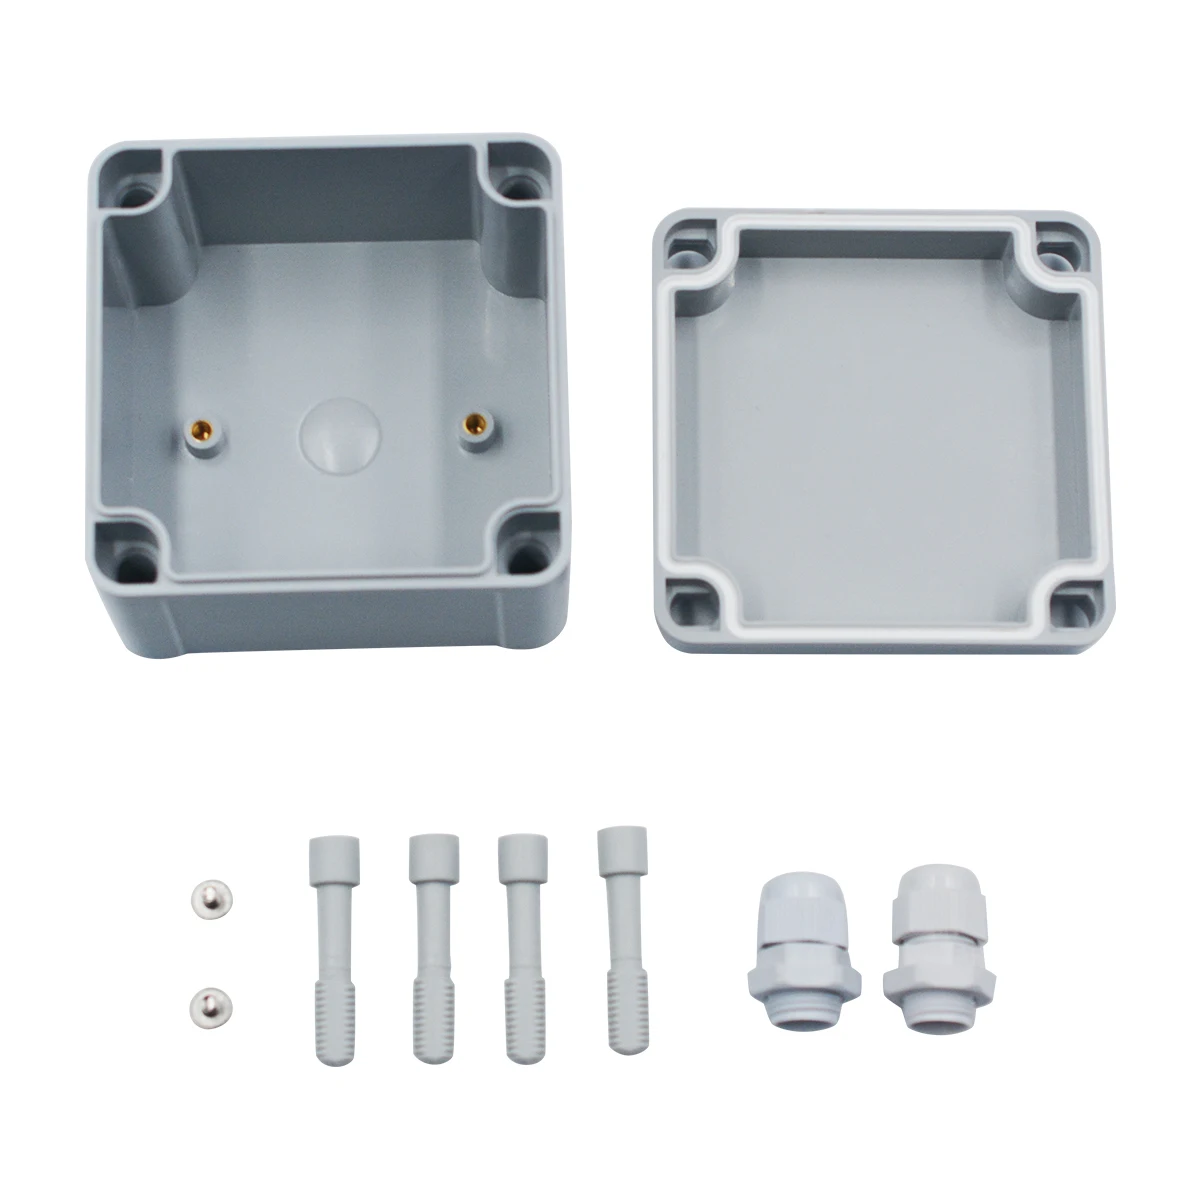 ABS Plastic Electrical Junction Box Case Waterproof Plastic Box